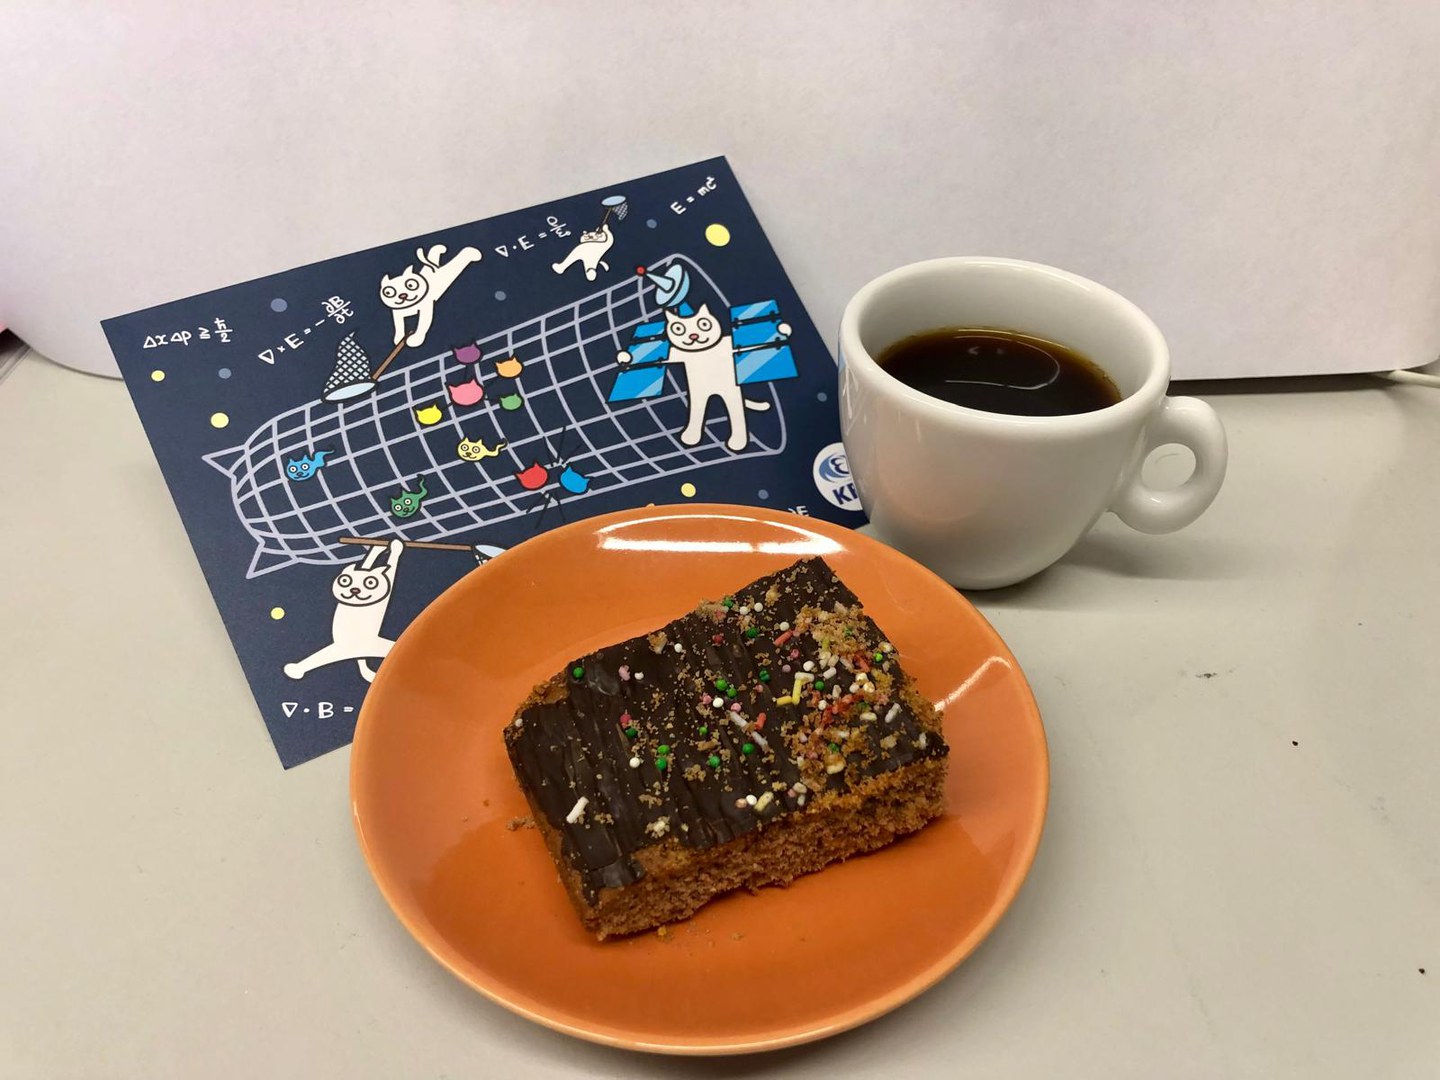 Our particle café, as always with coffee and cake